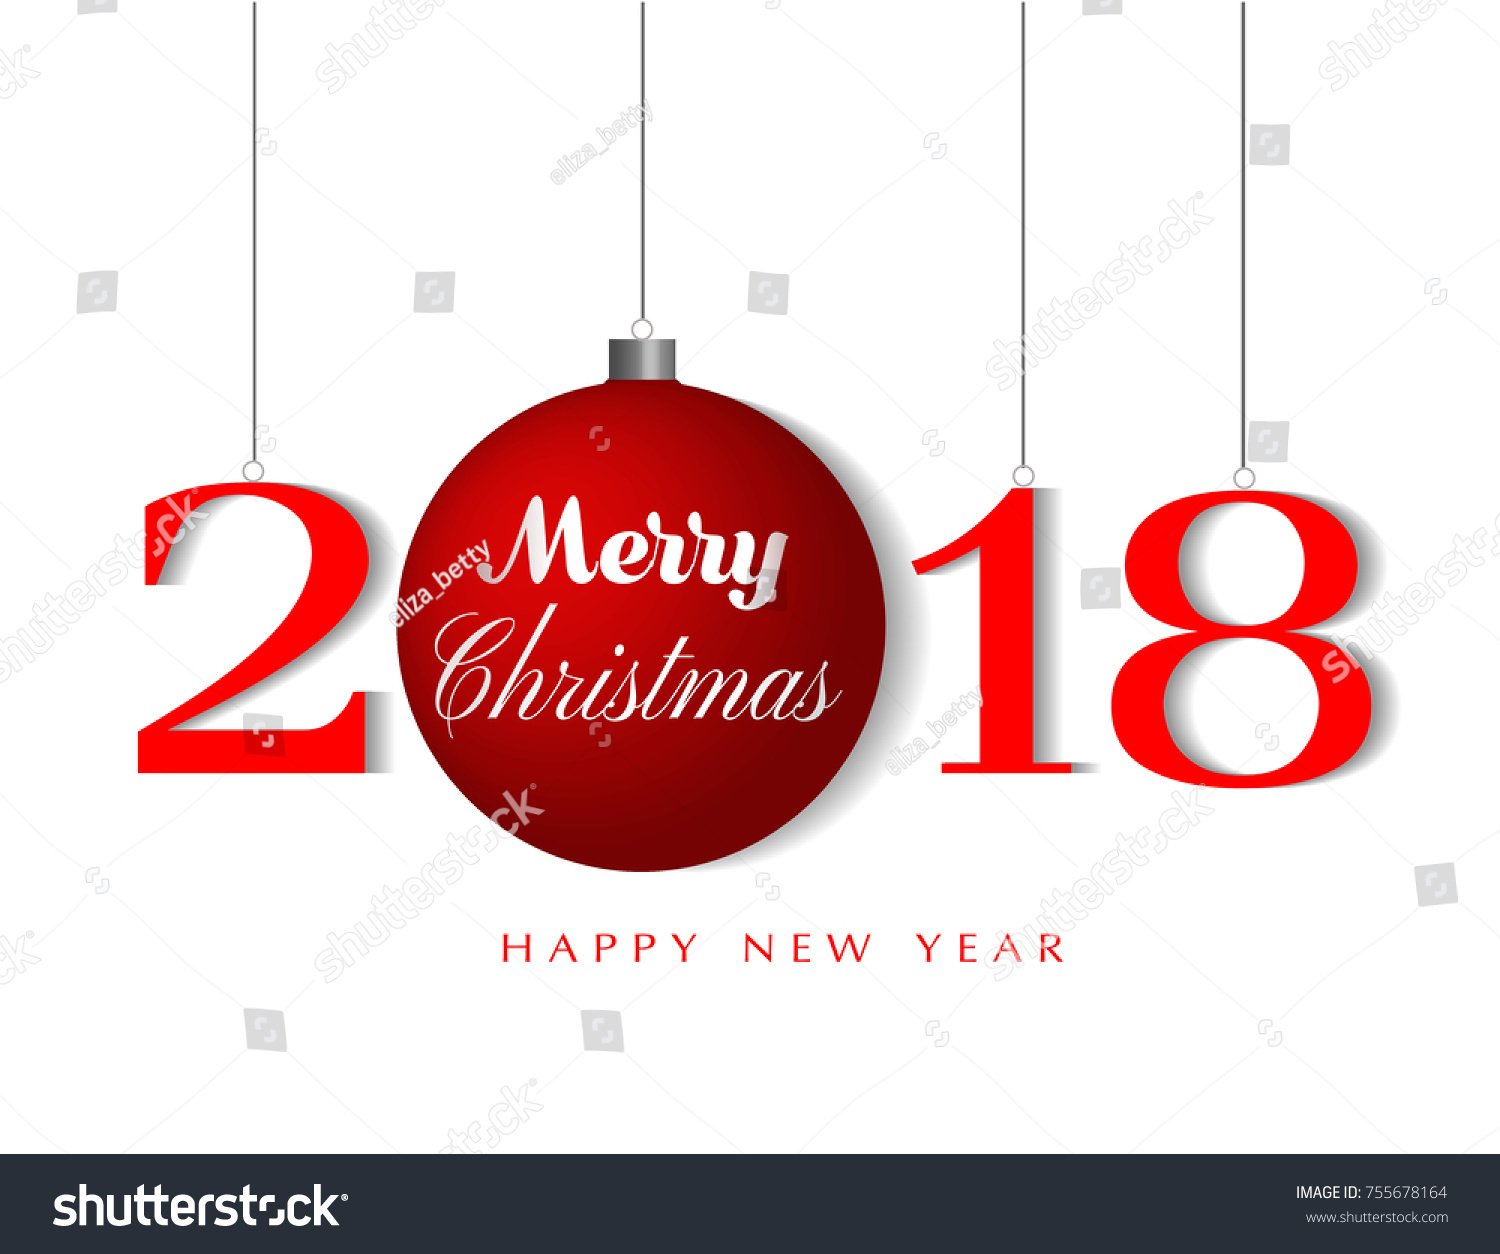 Merry Christmas Happy New Year Greeting Stock Vector 755678164